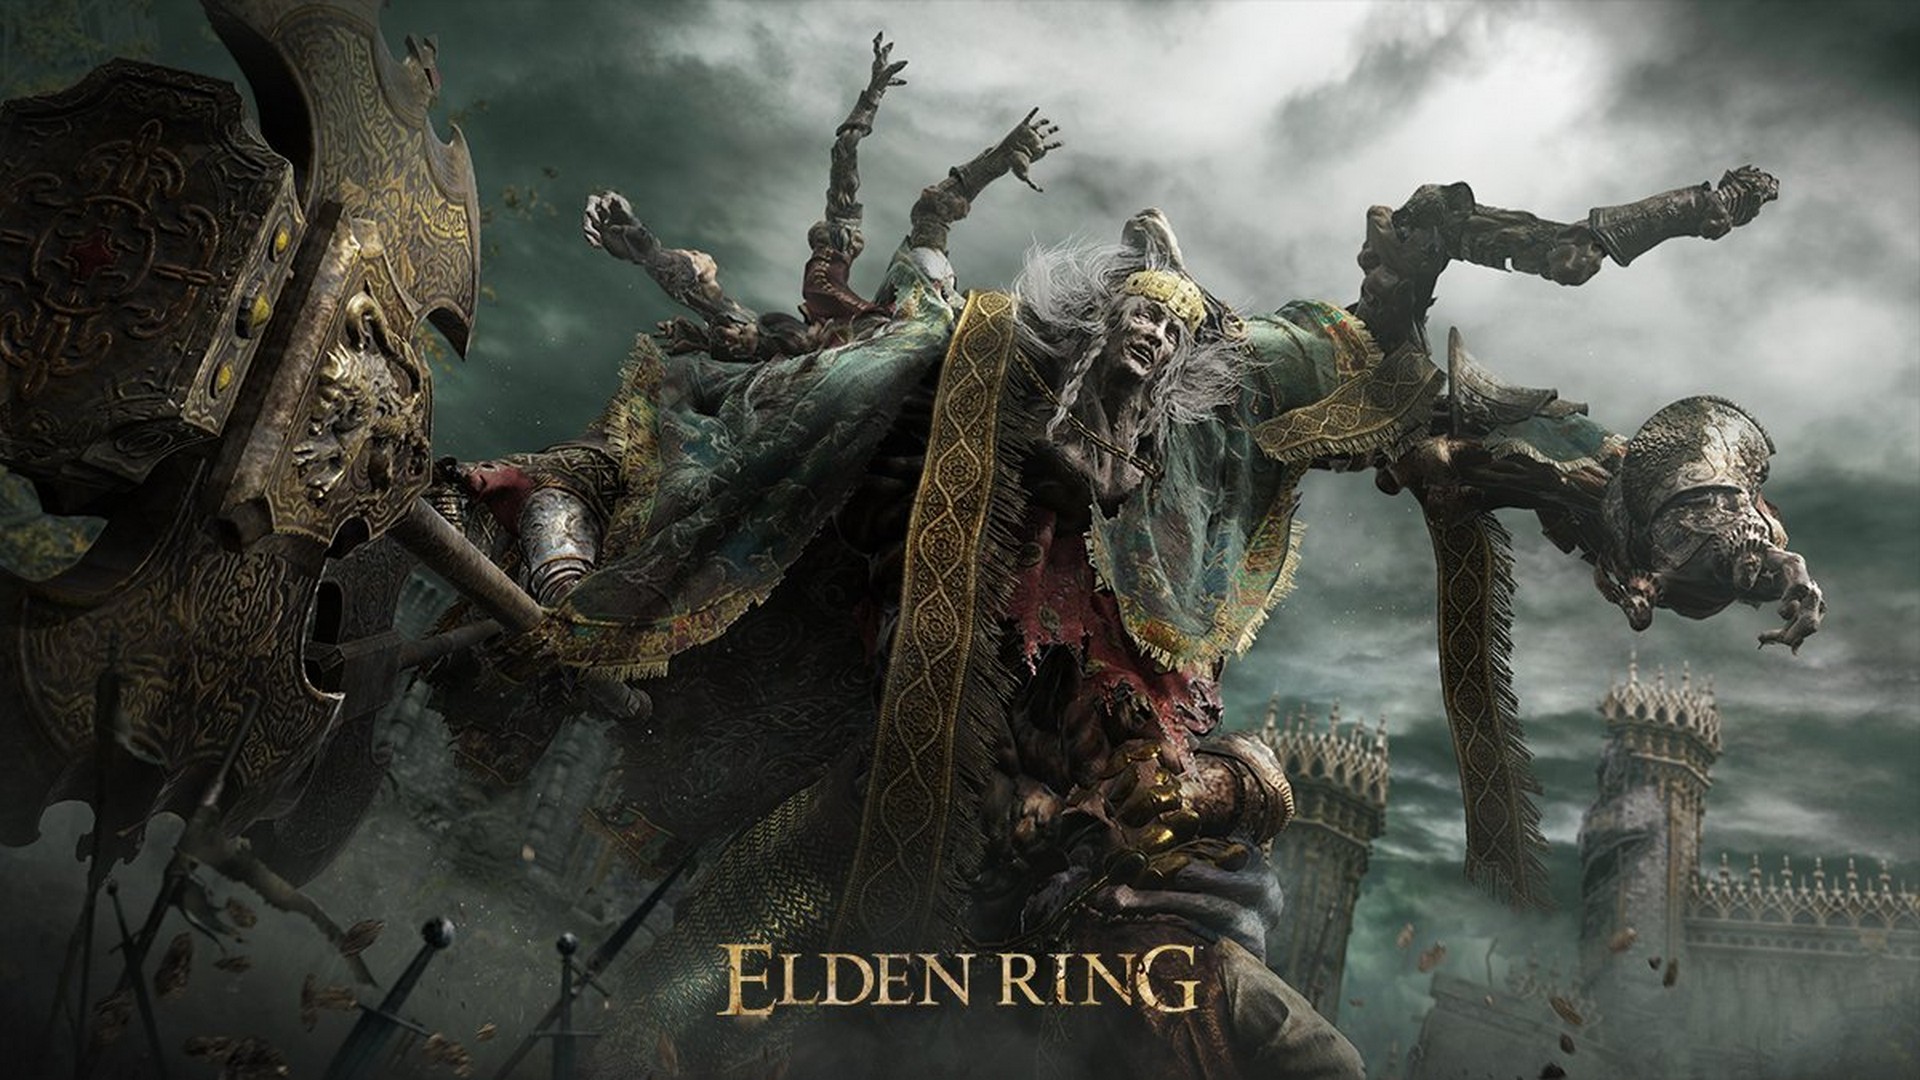 A Look Into The History Of Elden Ring’s Lands Between: The Age Of Gods